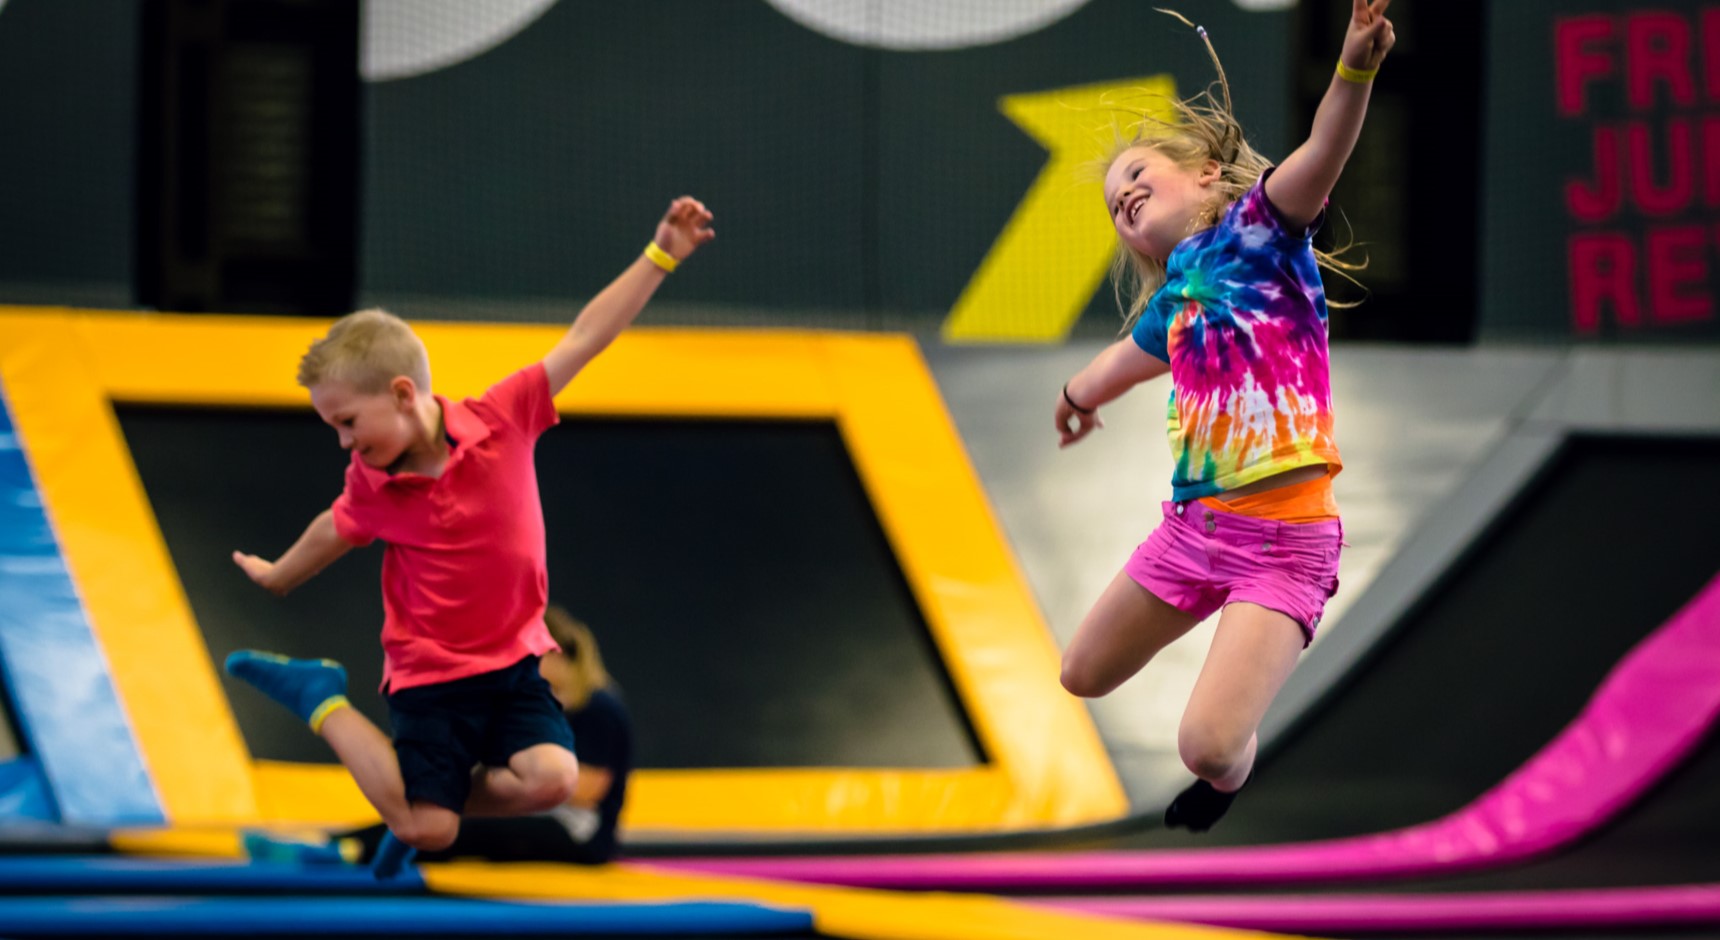 Bounce has a range of options to keep the kids active. Image: supplied.